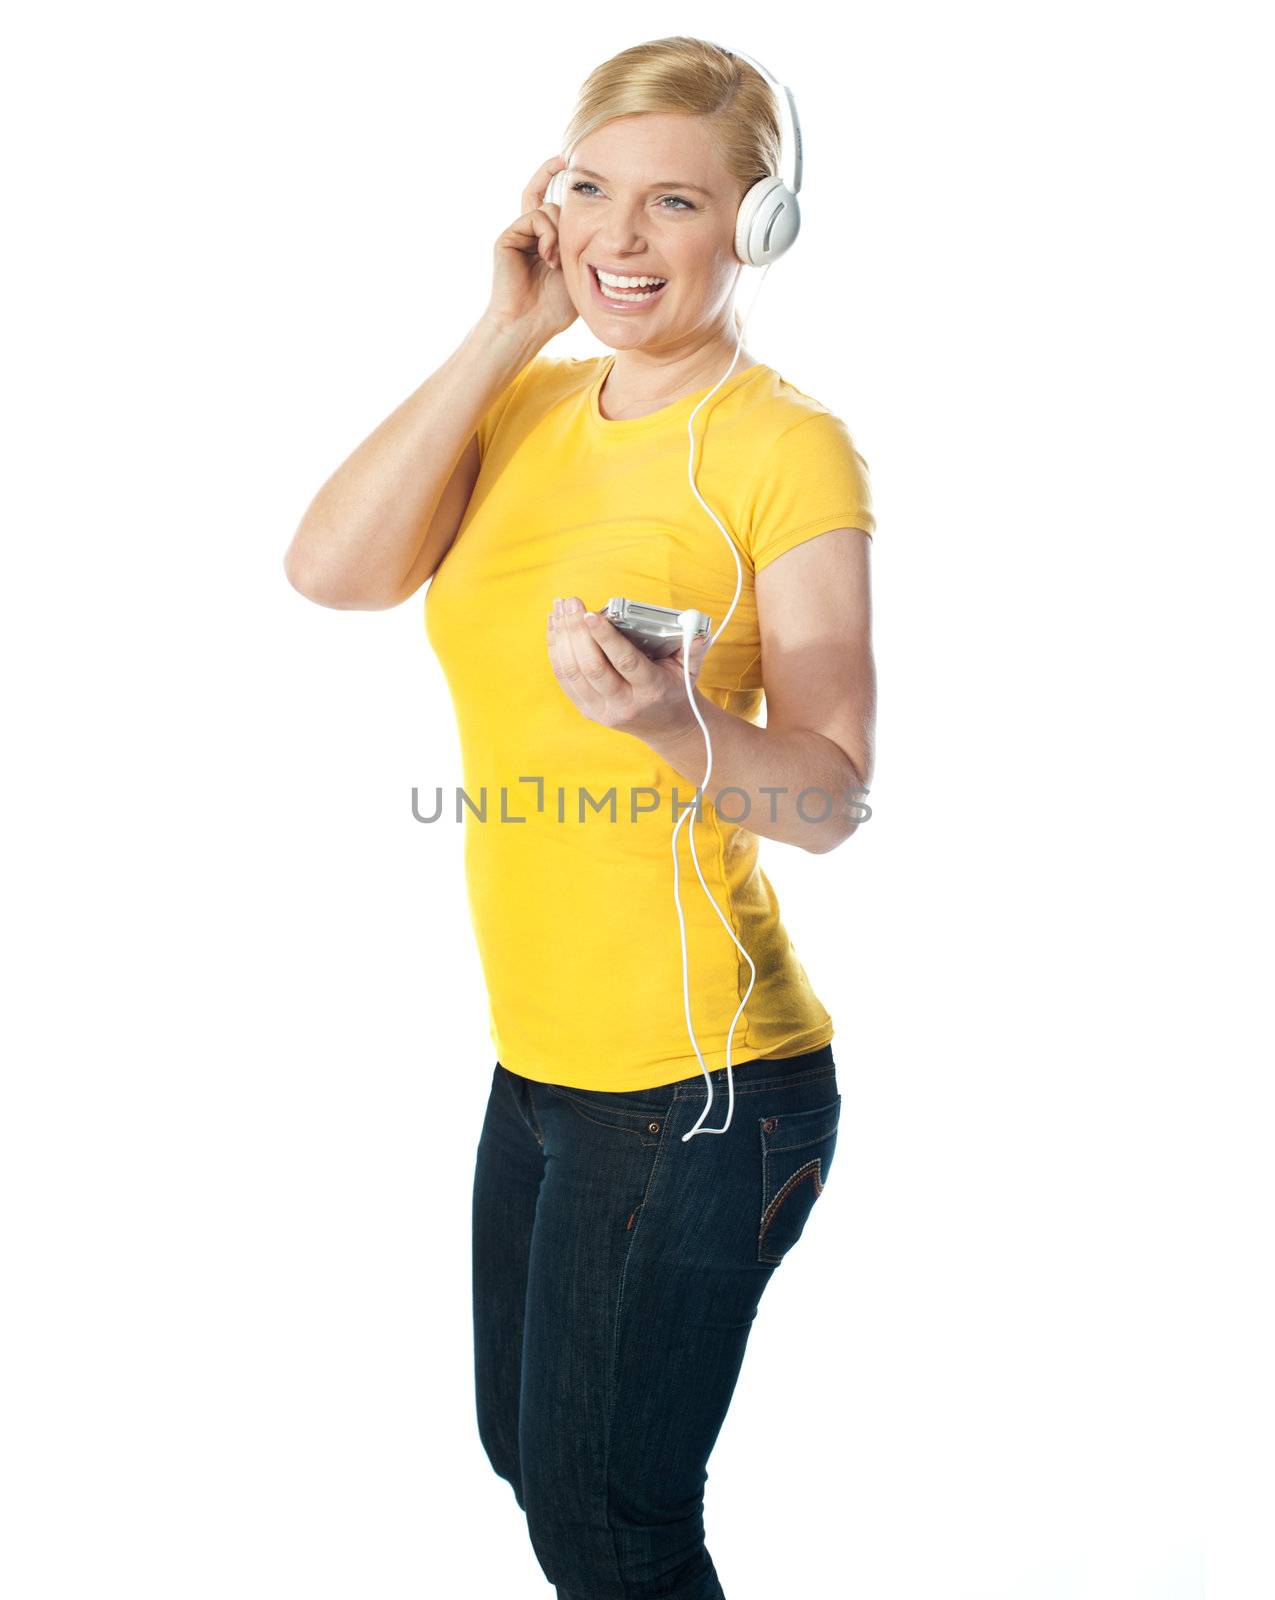 Pretty woman holding music player with headphones attached. Enjoying music